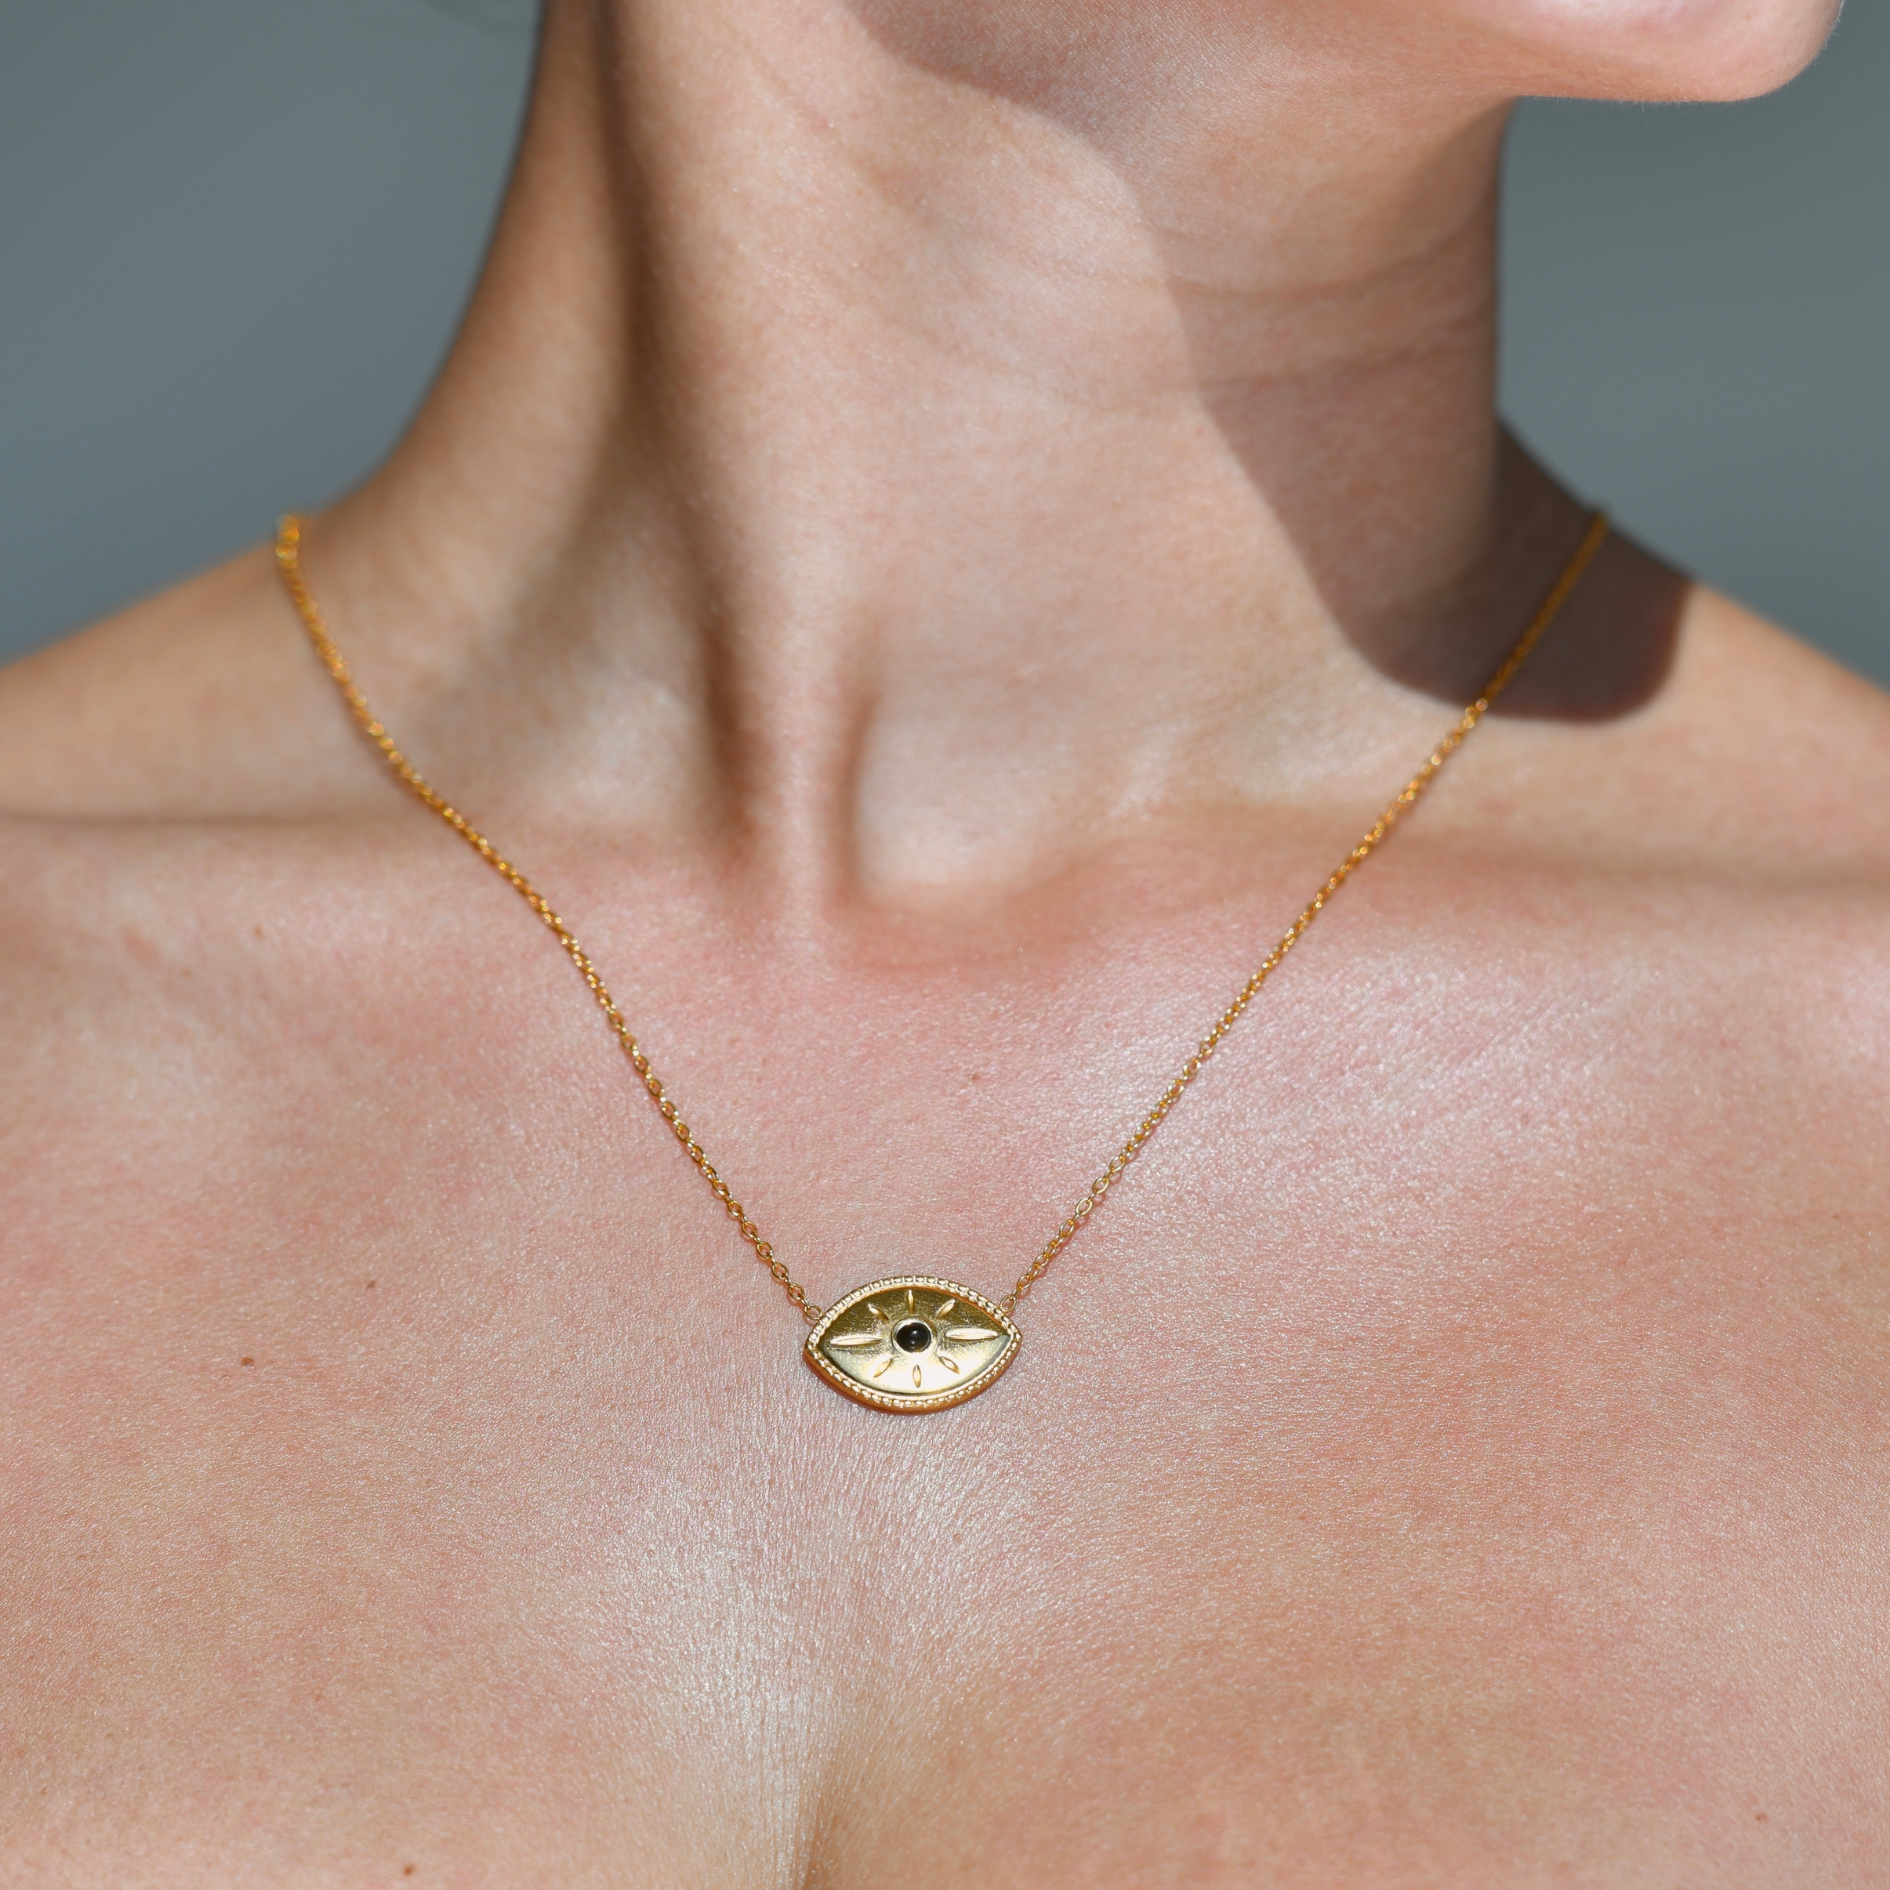 horizontal gold pendant. Eye shaped pendant with a black onyx stone in the middle of it. Chained both sides of the eye with the chain. Onyx Eye Gold Necklace